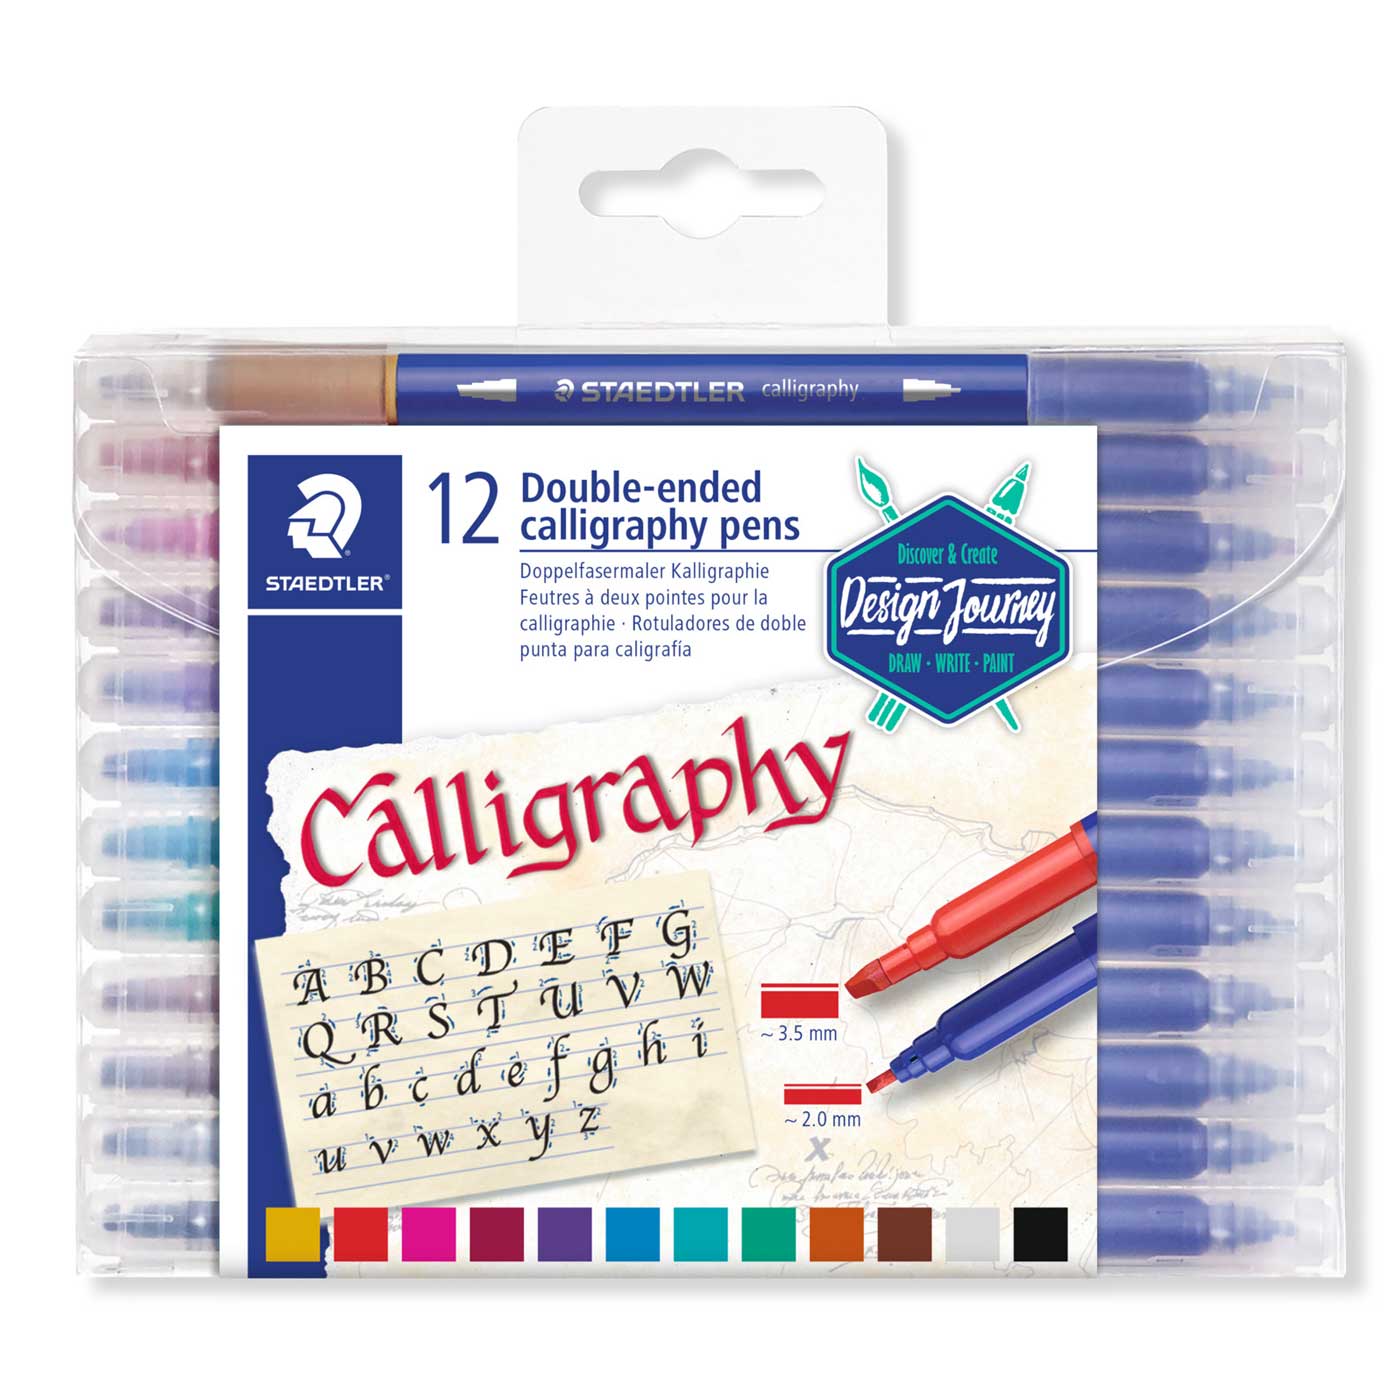 Staedtler Calligraphy Pen Double-Ended 2mm & 3.5mm Pack of 12 Assorted Colours